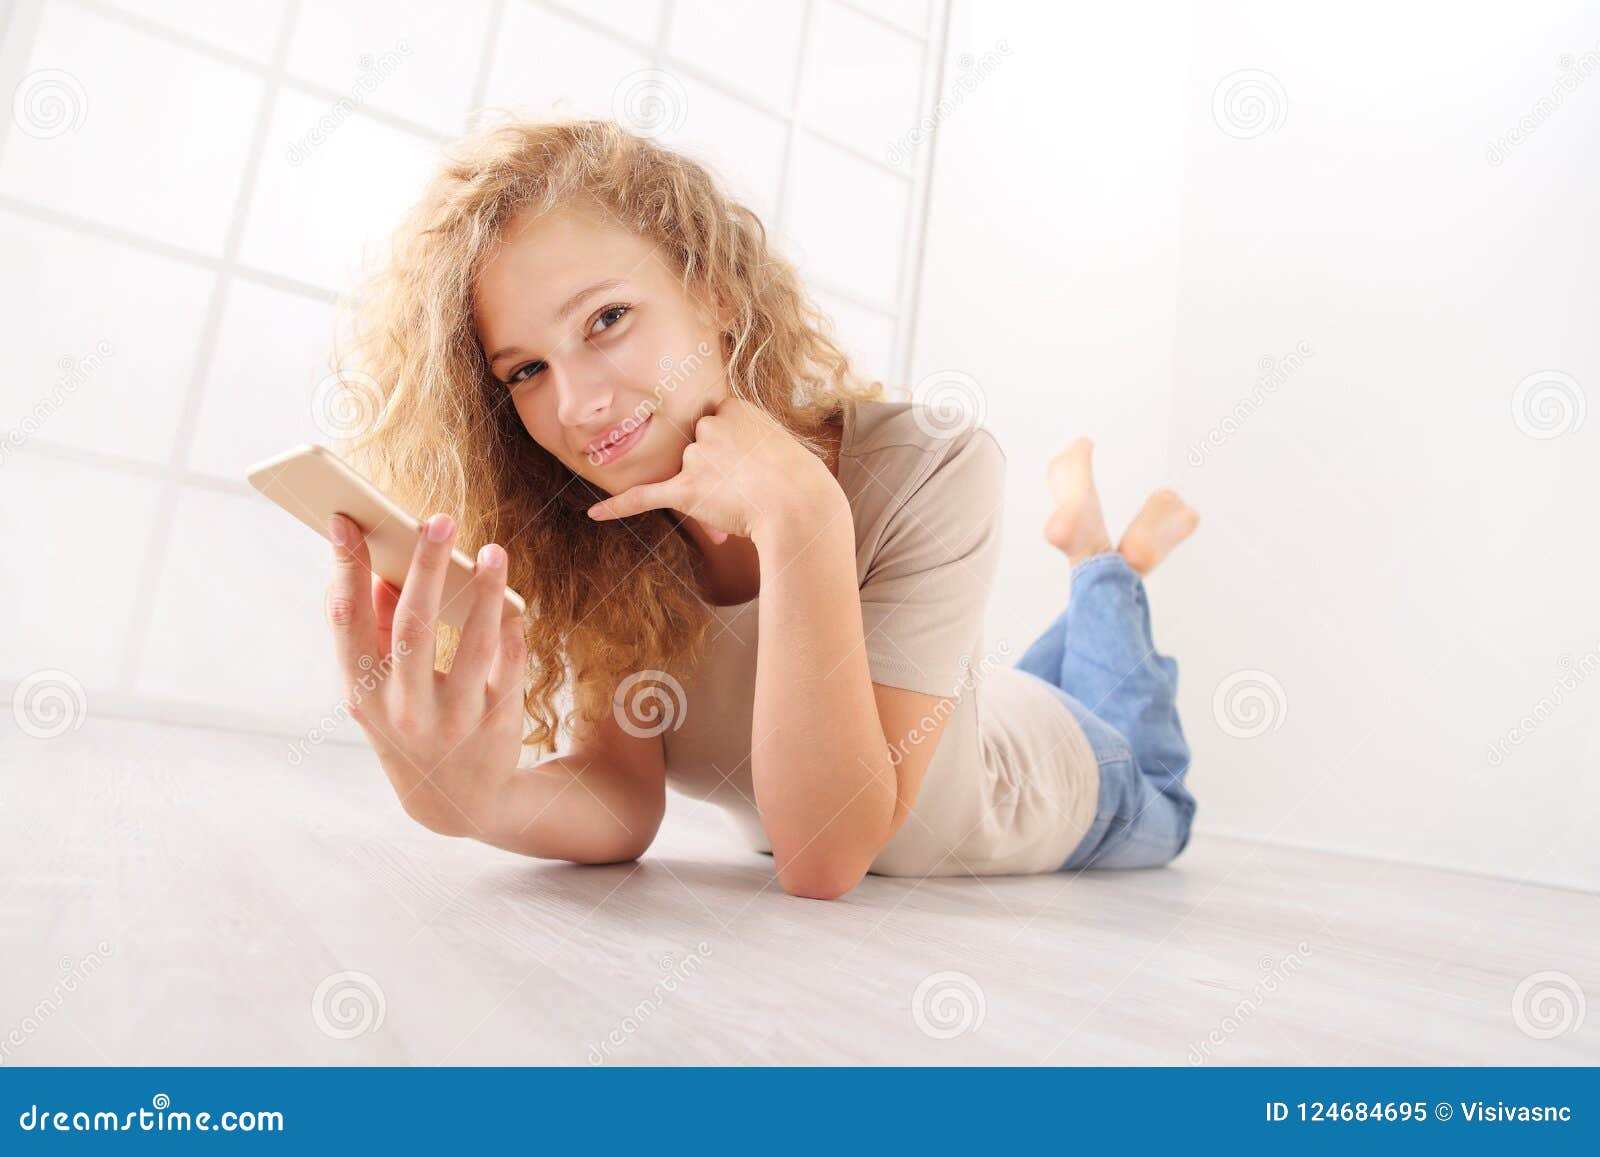 Lying Young Woman On Floor Talking On Cellphone With Long Hair